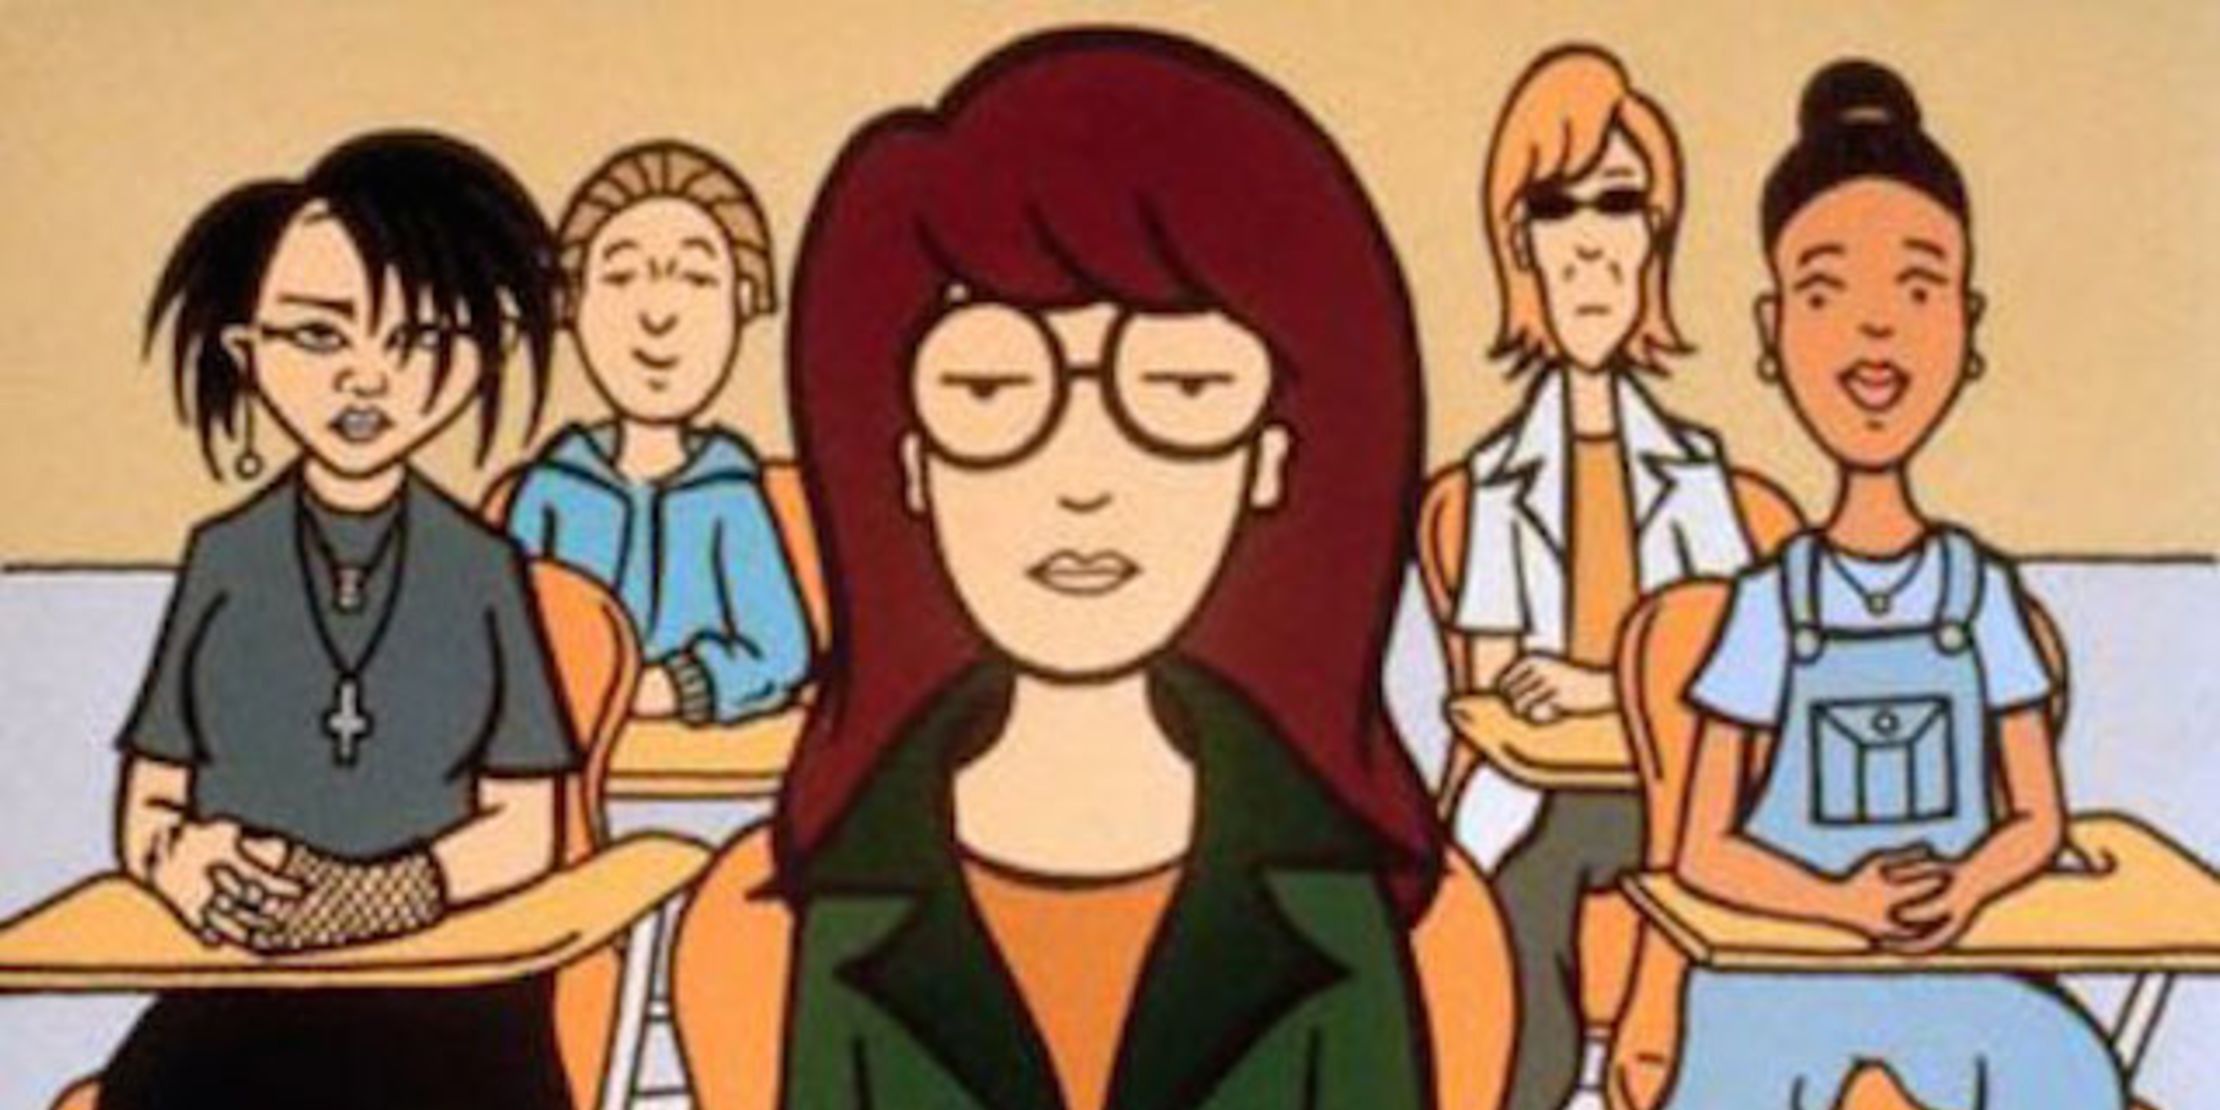 Daria in her classroom in the show